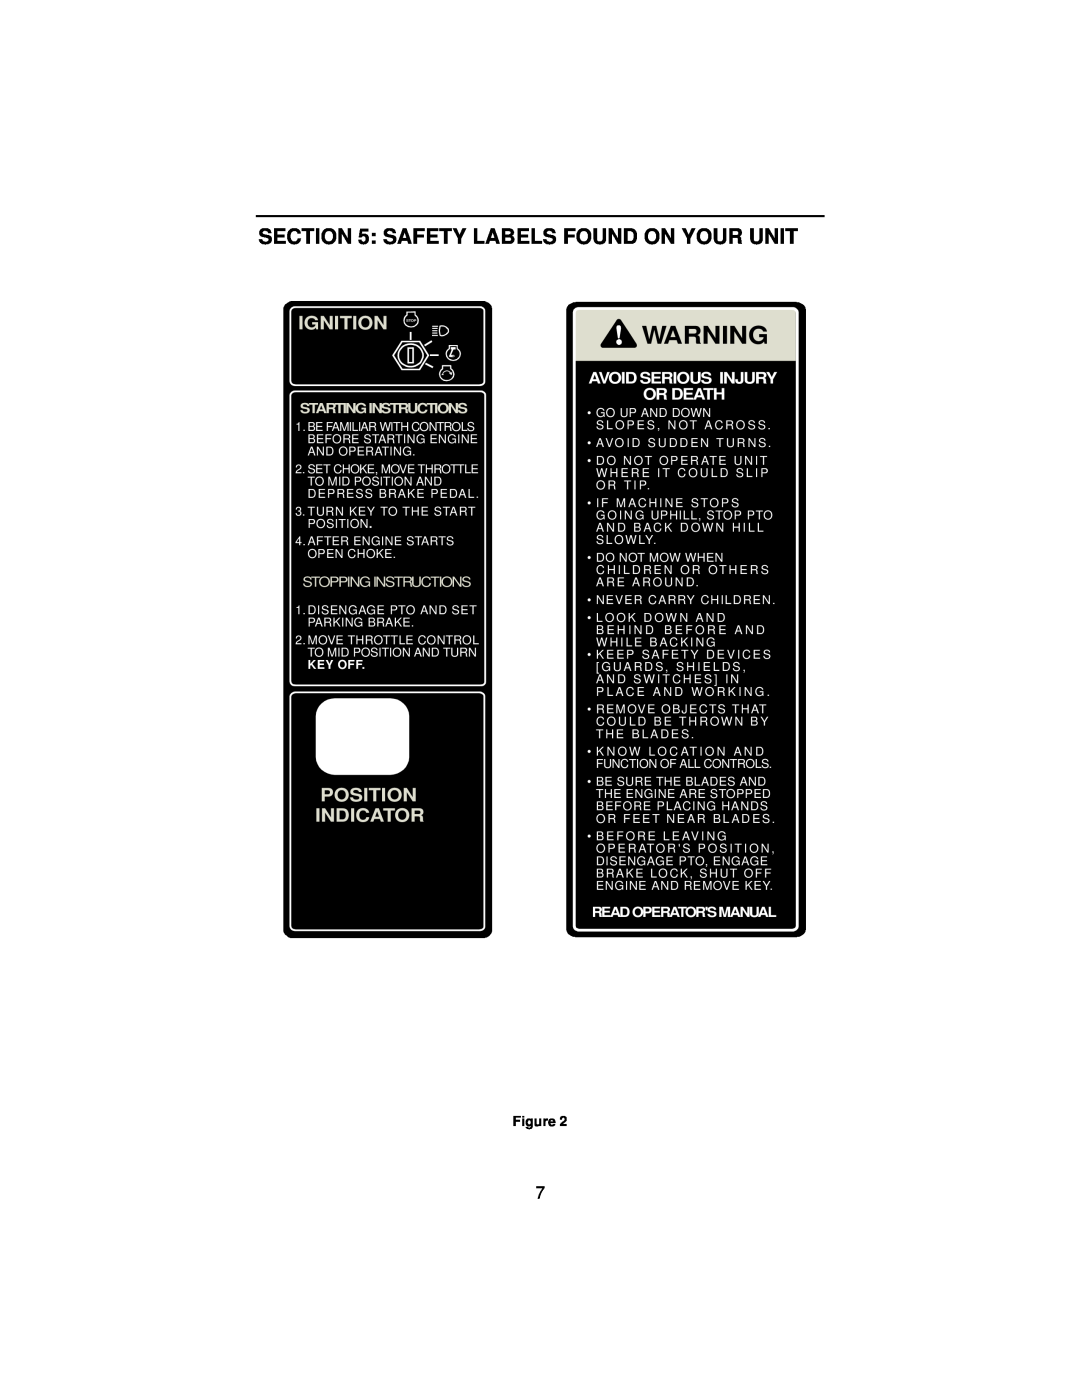 Cub Cadet 3185 Safety Labels Found On Your Unit, Ignition Stop, Position Indicator, Avoid Serious Injury Or Death, Key Off 